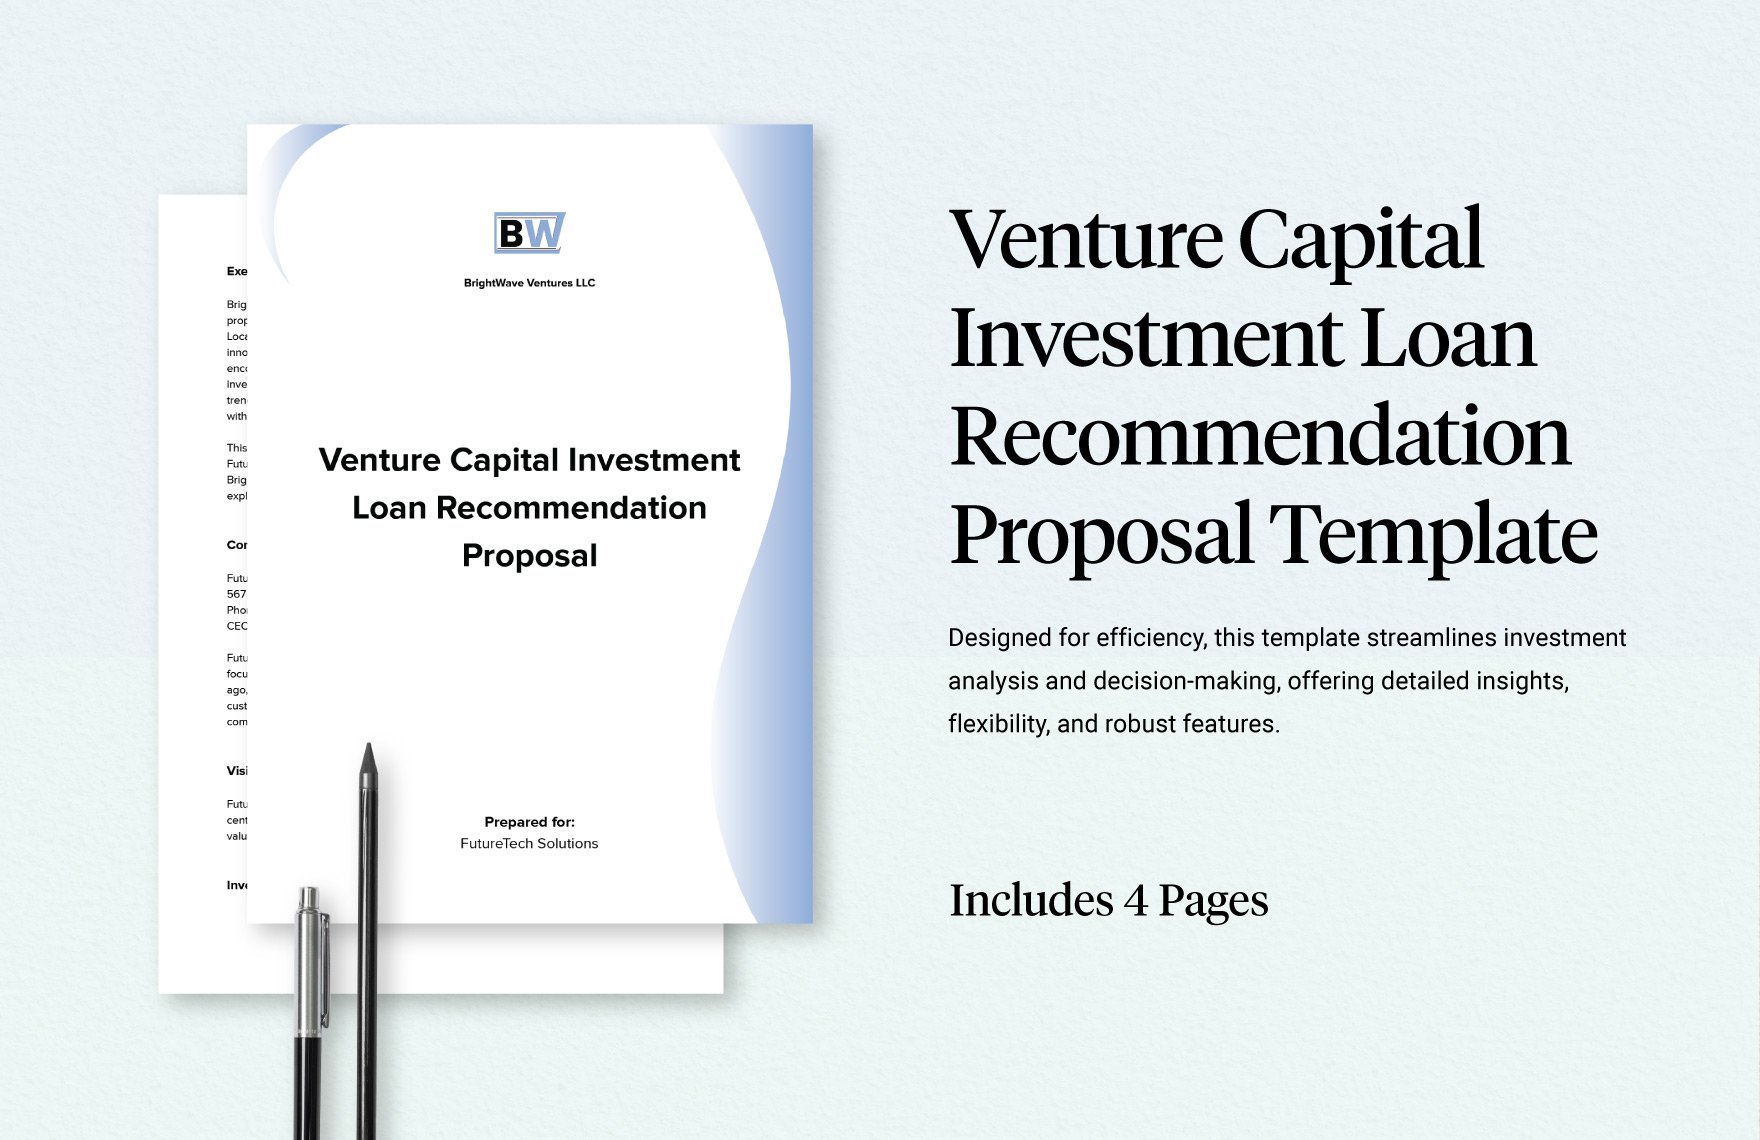 Venture Capital Investment Loan Recommendation Proposal Template